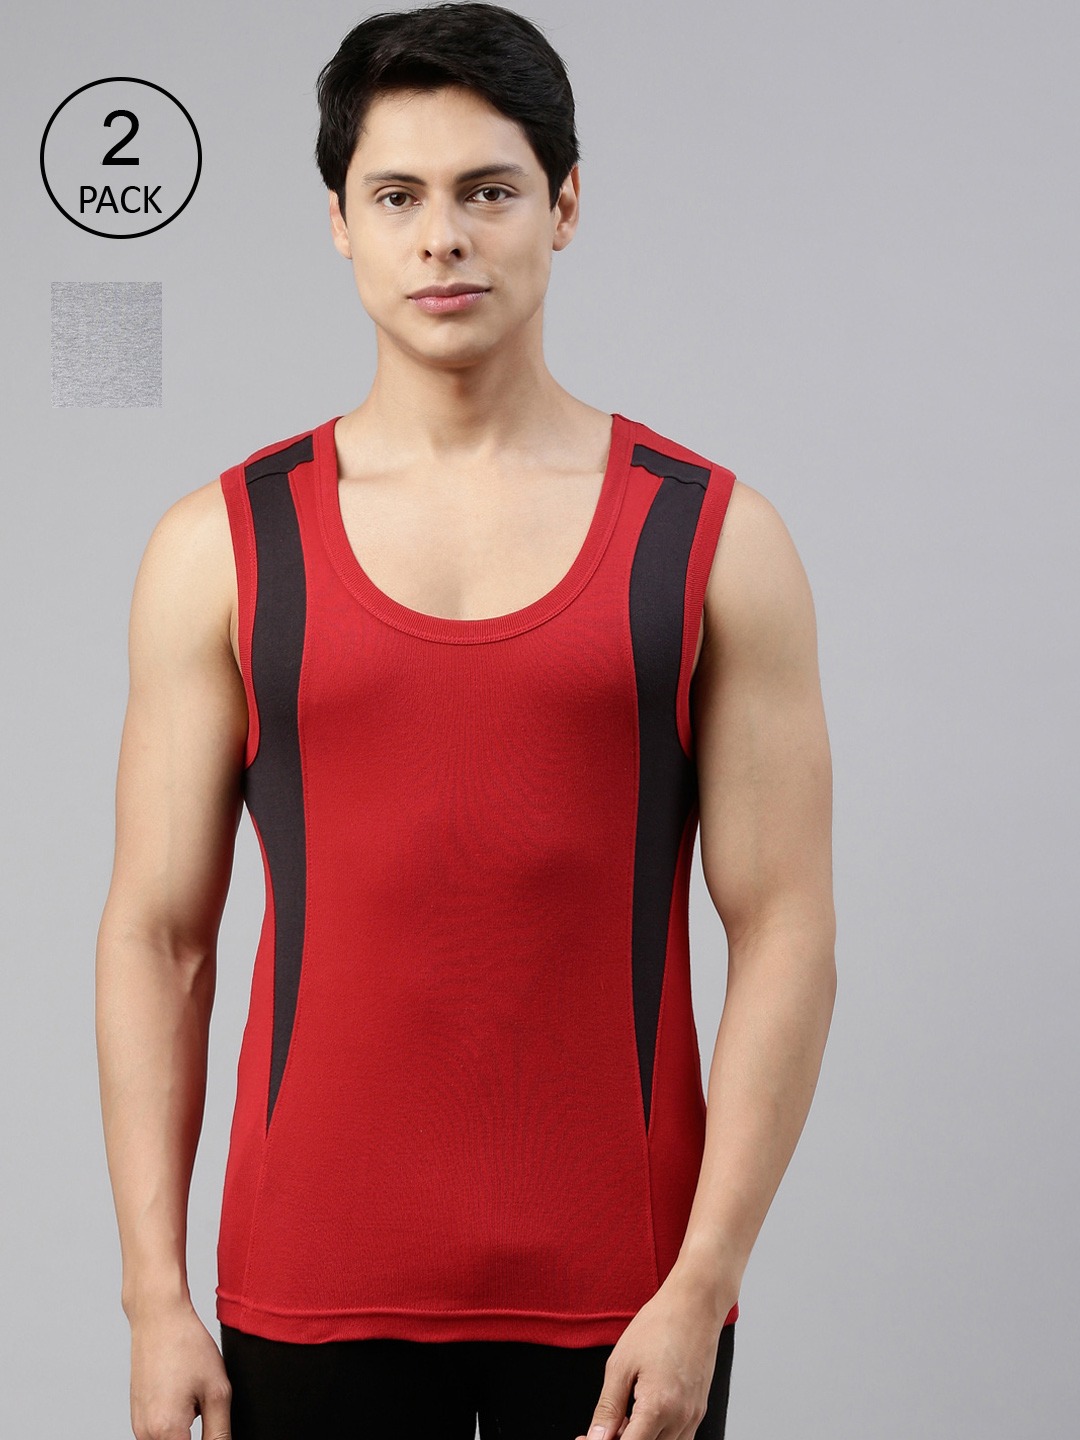 Clothing Innerwear Vests | DIXCY SCOTT Men Red & Grey Pure Combed Cotton Gym Vests Pack Of 2 - LT99553